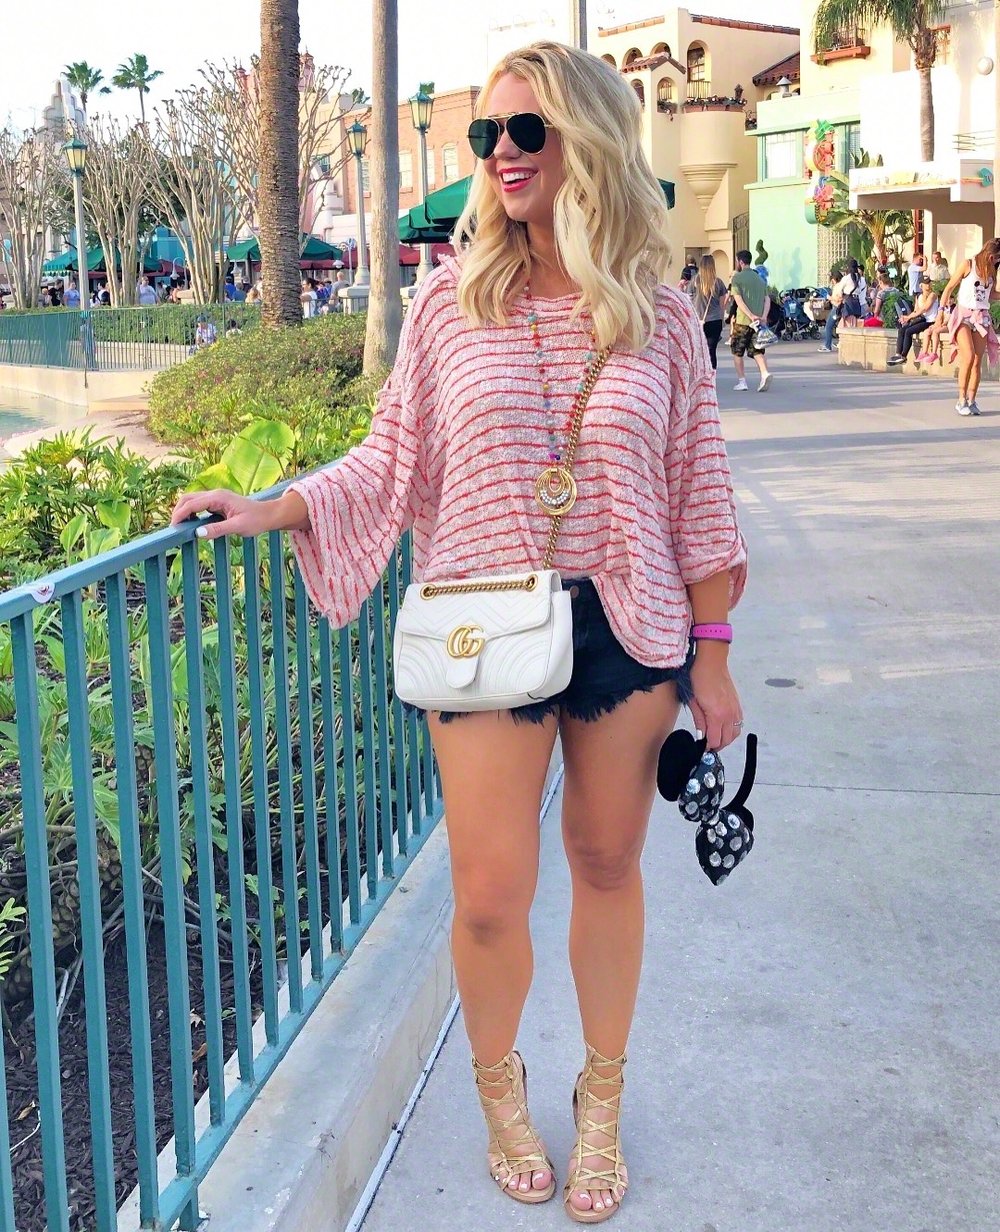  This breezy striped Free People top is another comfy option for Disney days! I changed into this outfit for dinner and an evening at Hollywood Studios.  